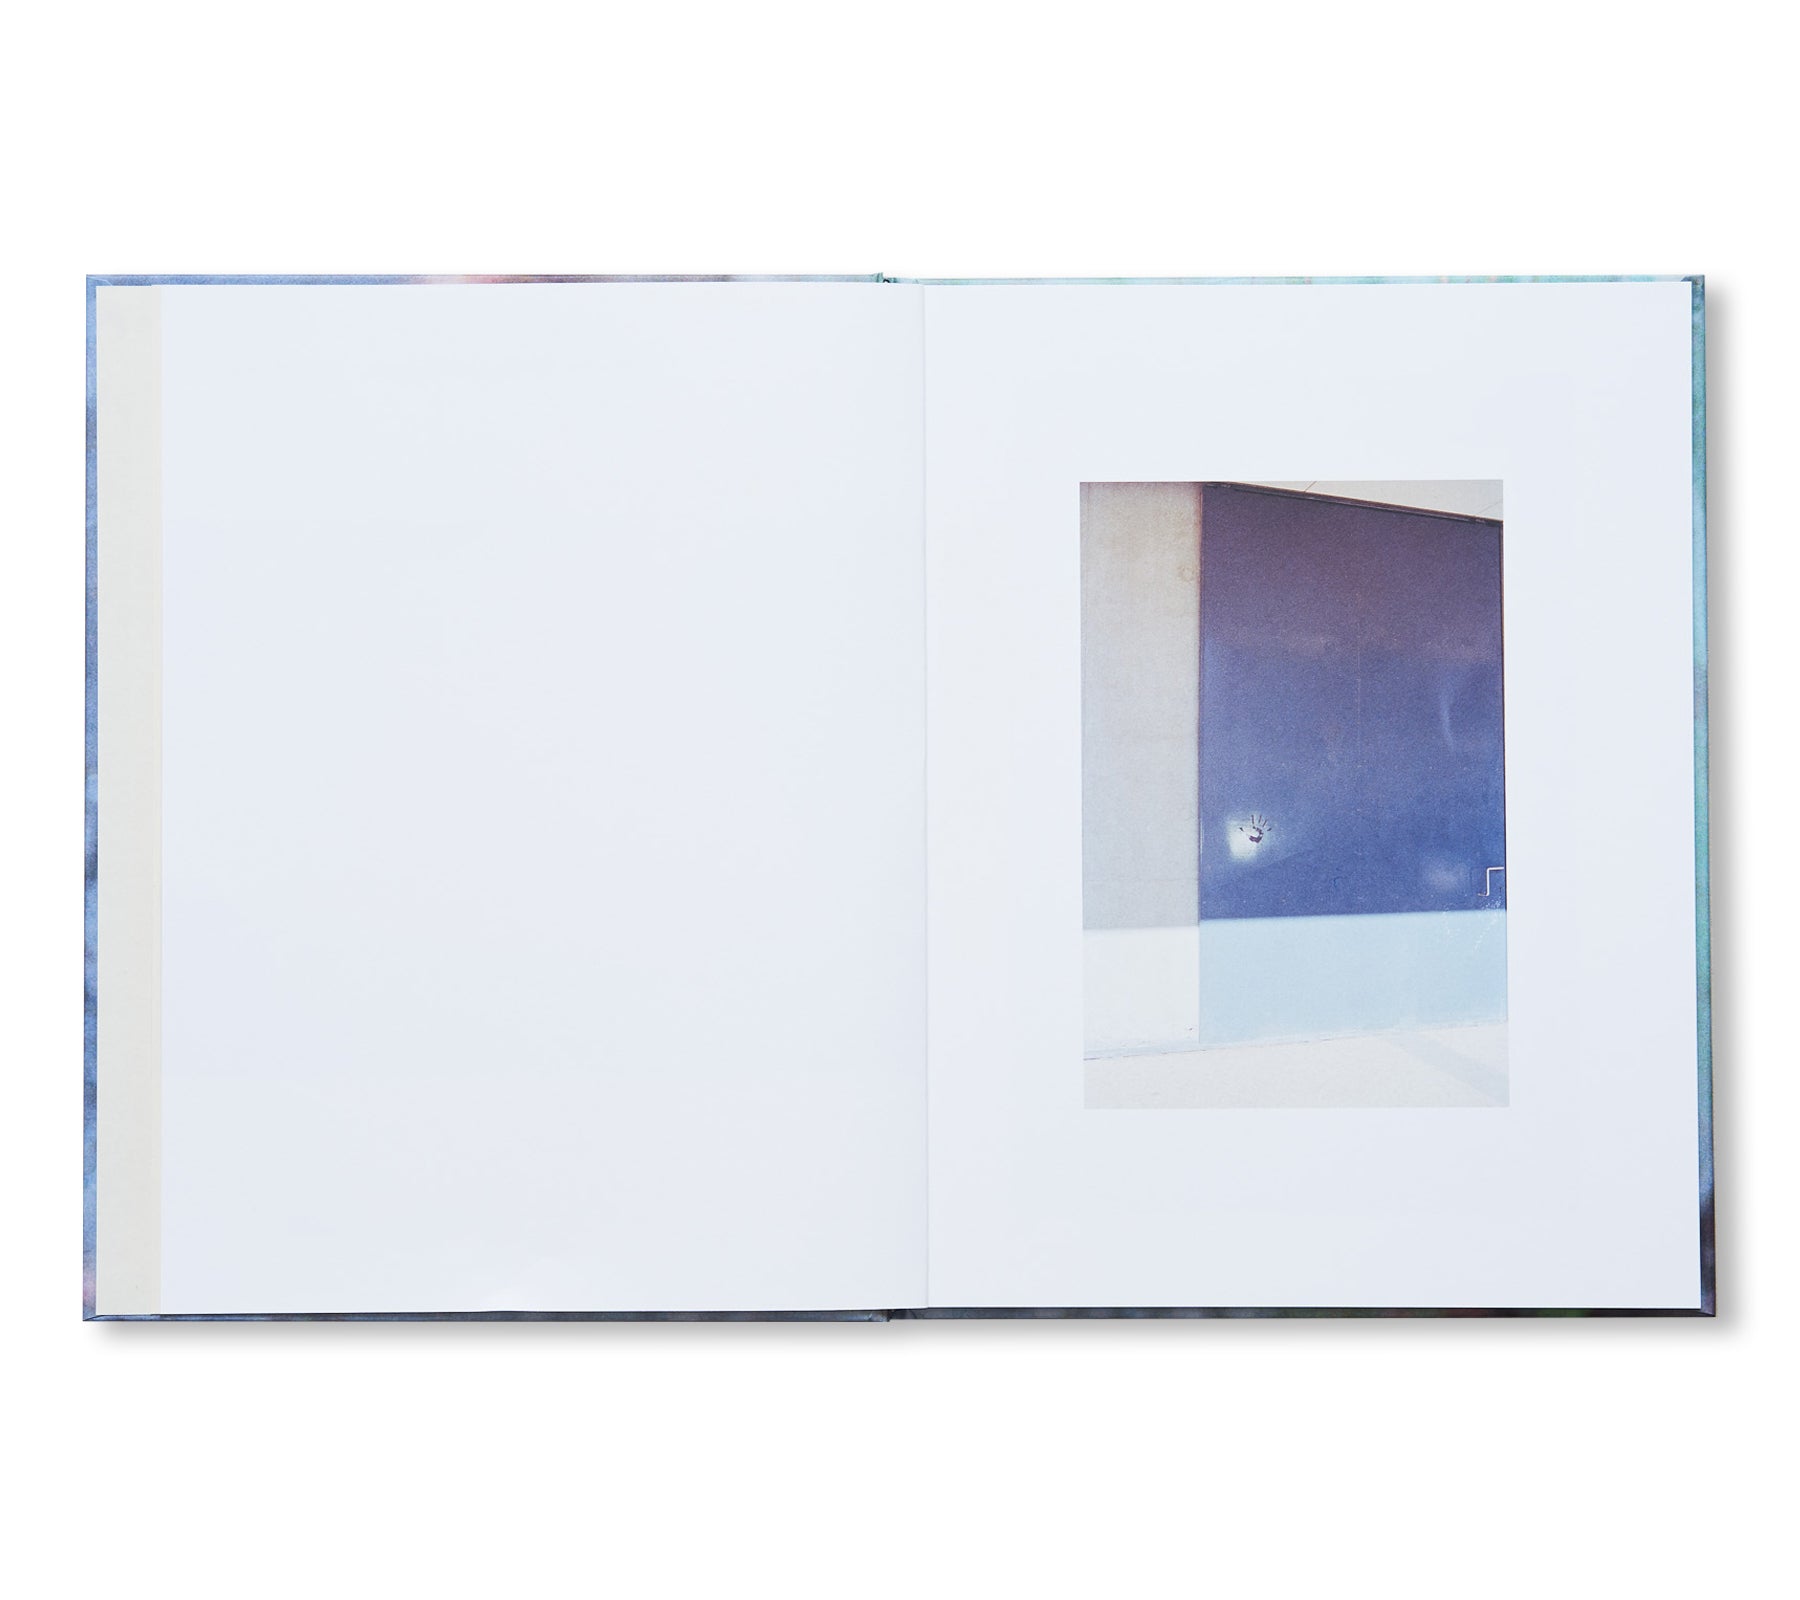 NOTES ON ORDINARY SPACES by Ola Rindal